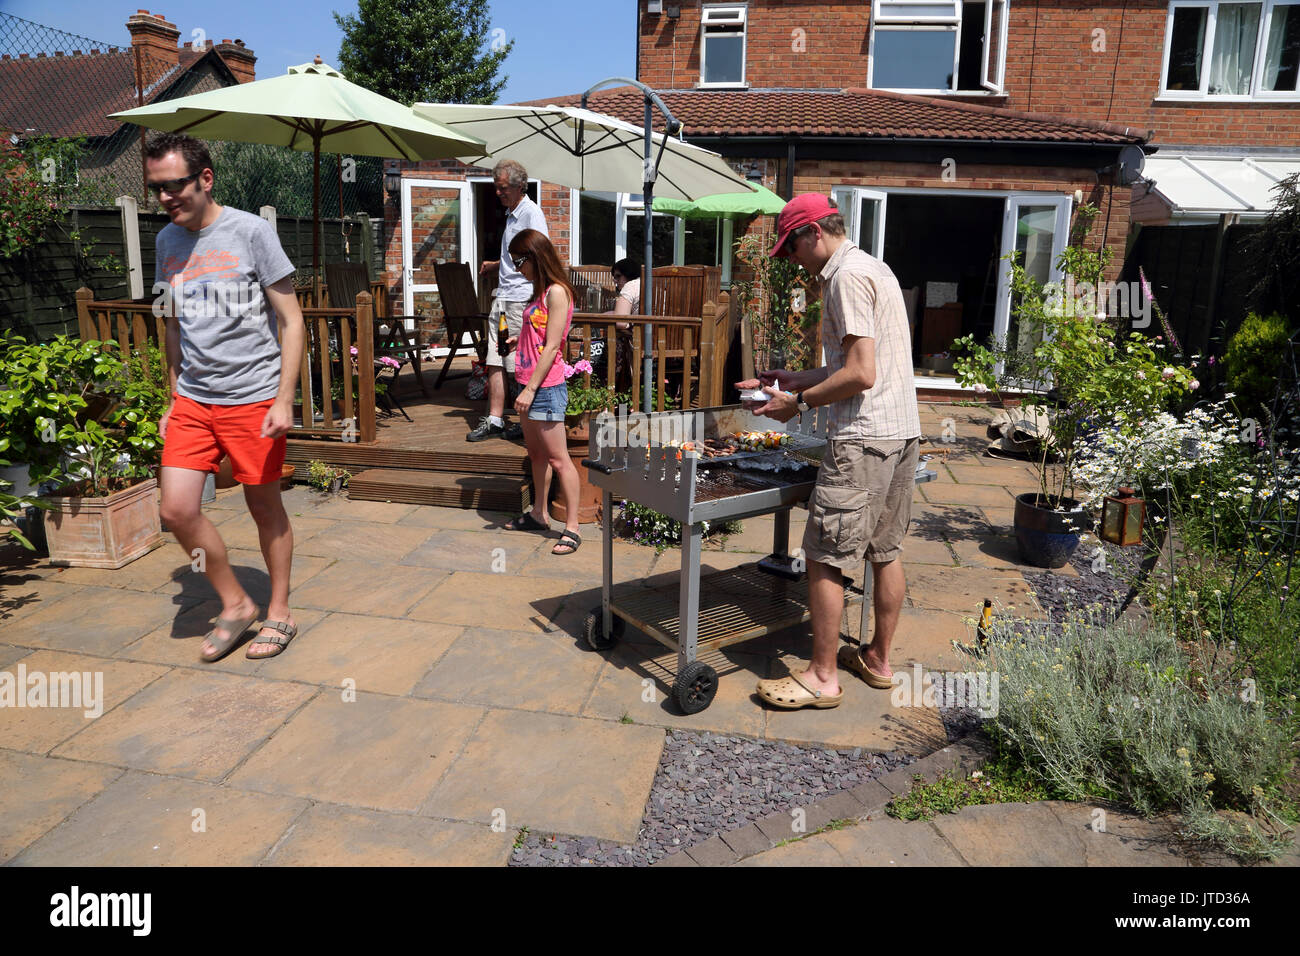 Family Having A Barbeque In Garden During The Summer Birmingham West Midlands England Stock Photo